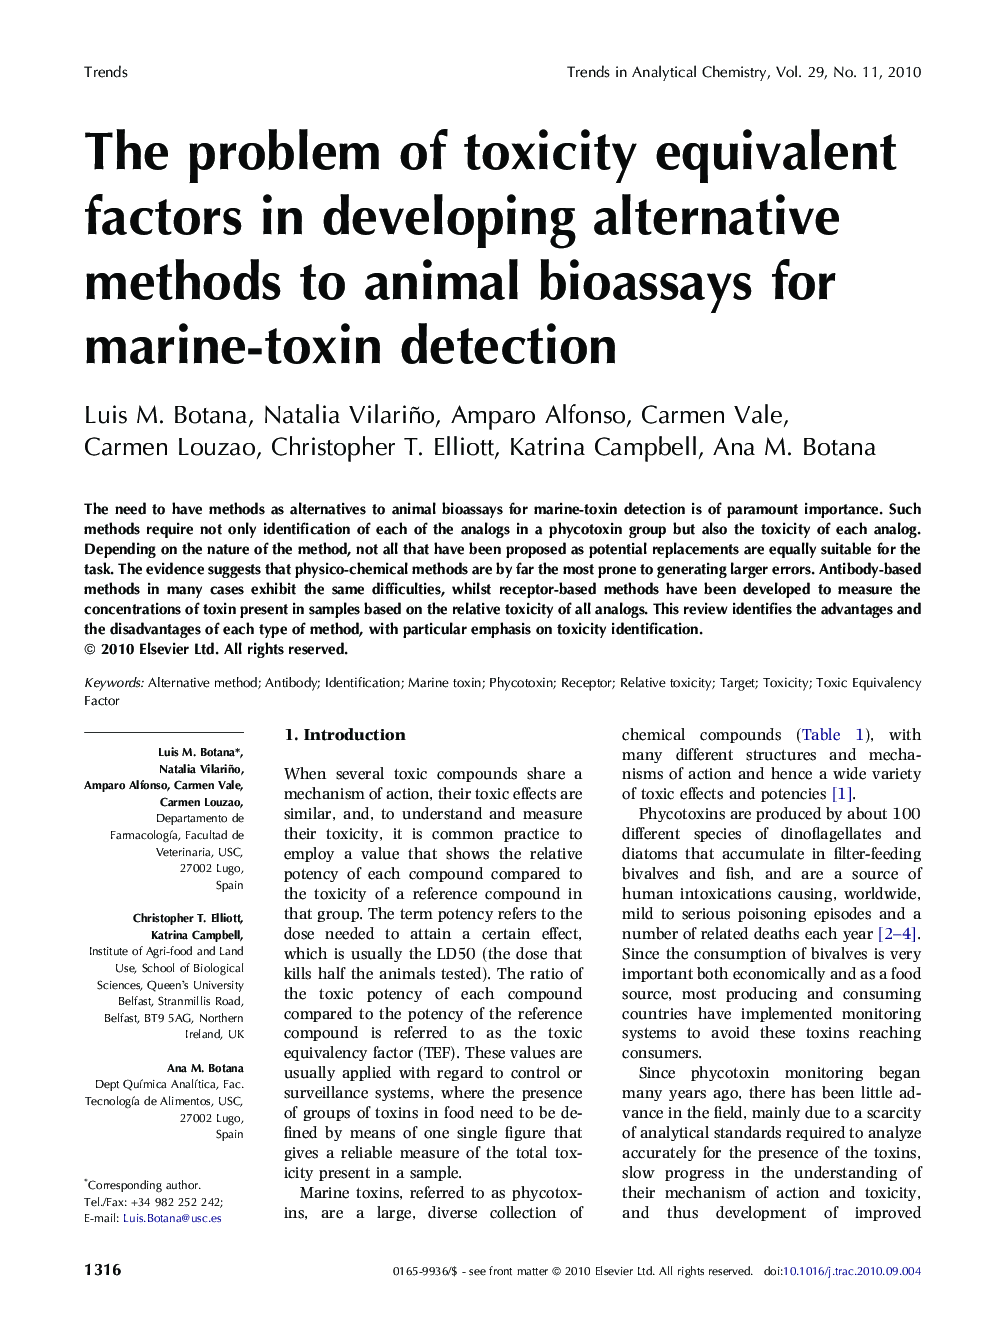 The problem of toxicity equivalent factors in developing alternative methods to animal bioassays for marine-toxin detection